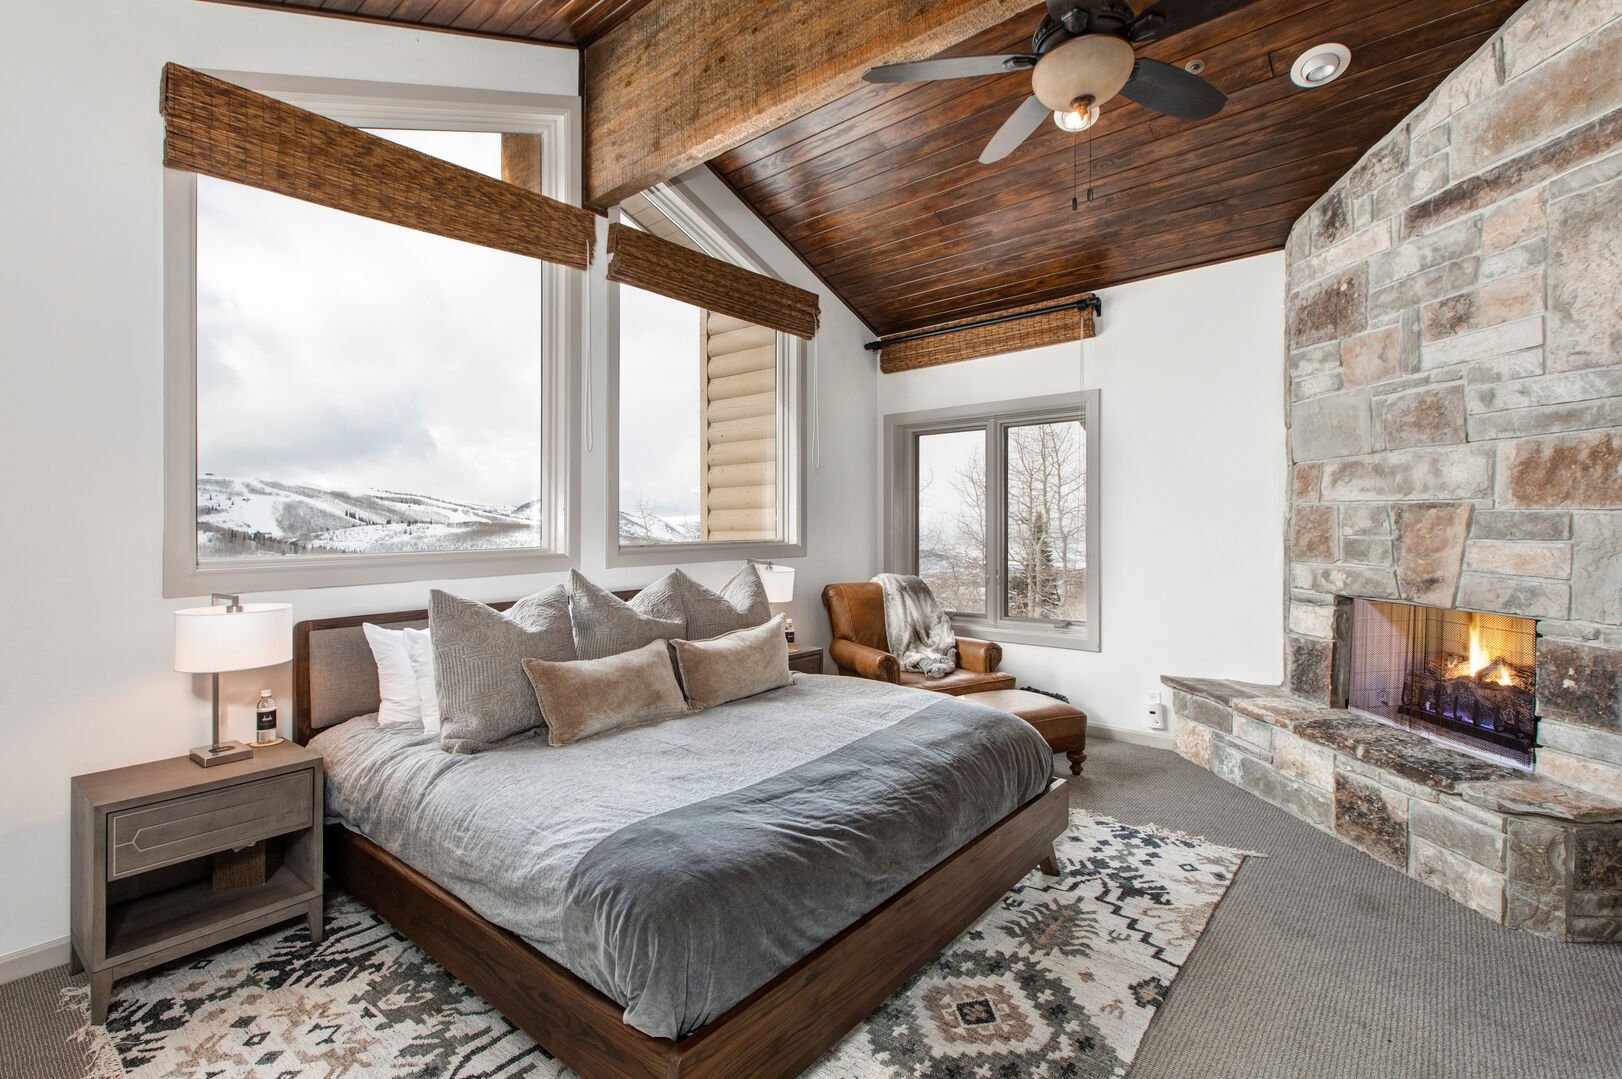 Upper level master bedroom. Custom-upholstered king bed, floor-to-ceiling stone fireplace, vaulted wooden plank ceiling, leather reading chair. Large picture windows show off gorgeous western views toward Deer Valley ski runs blanketed in snow.